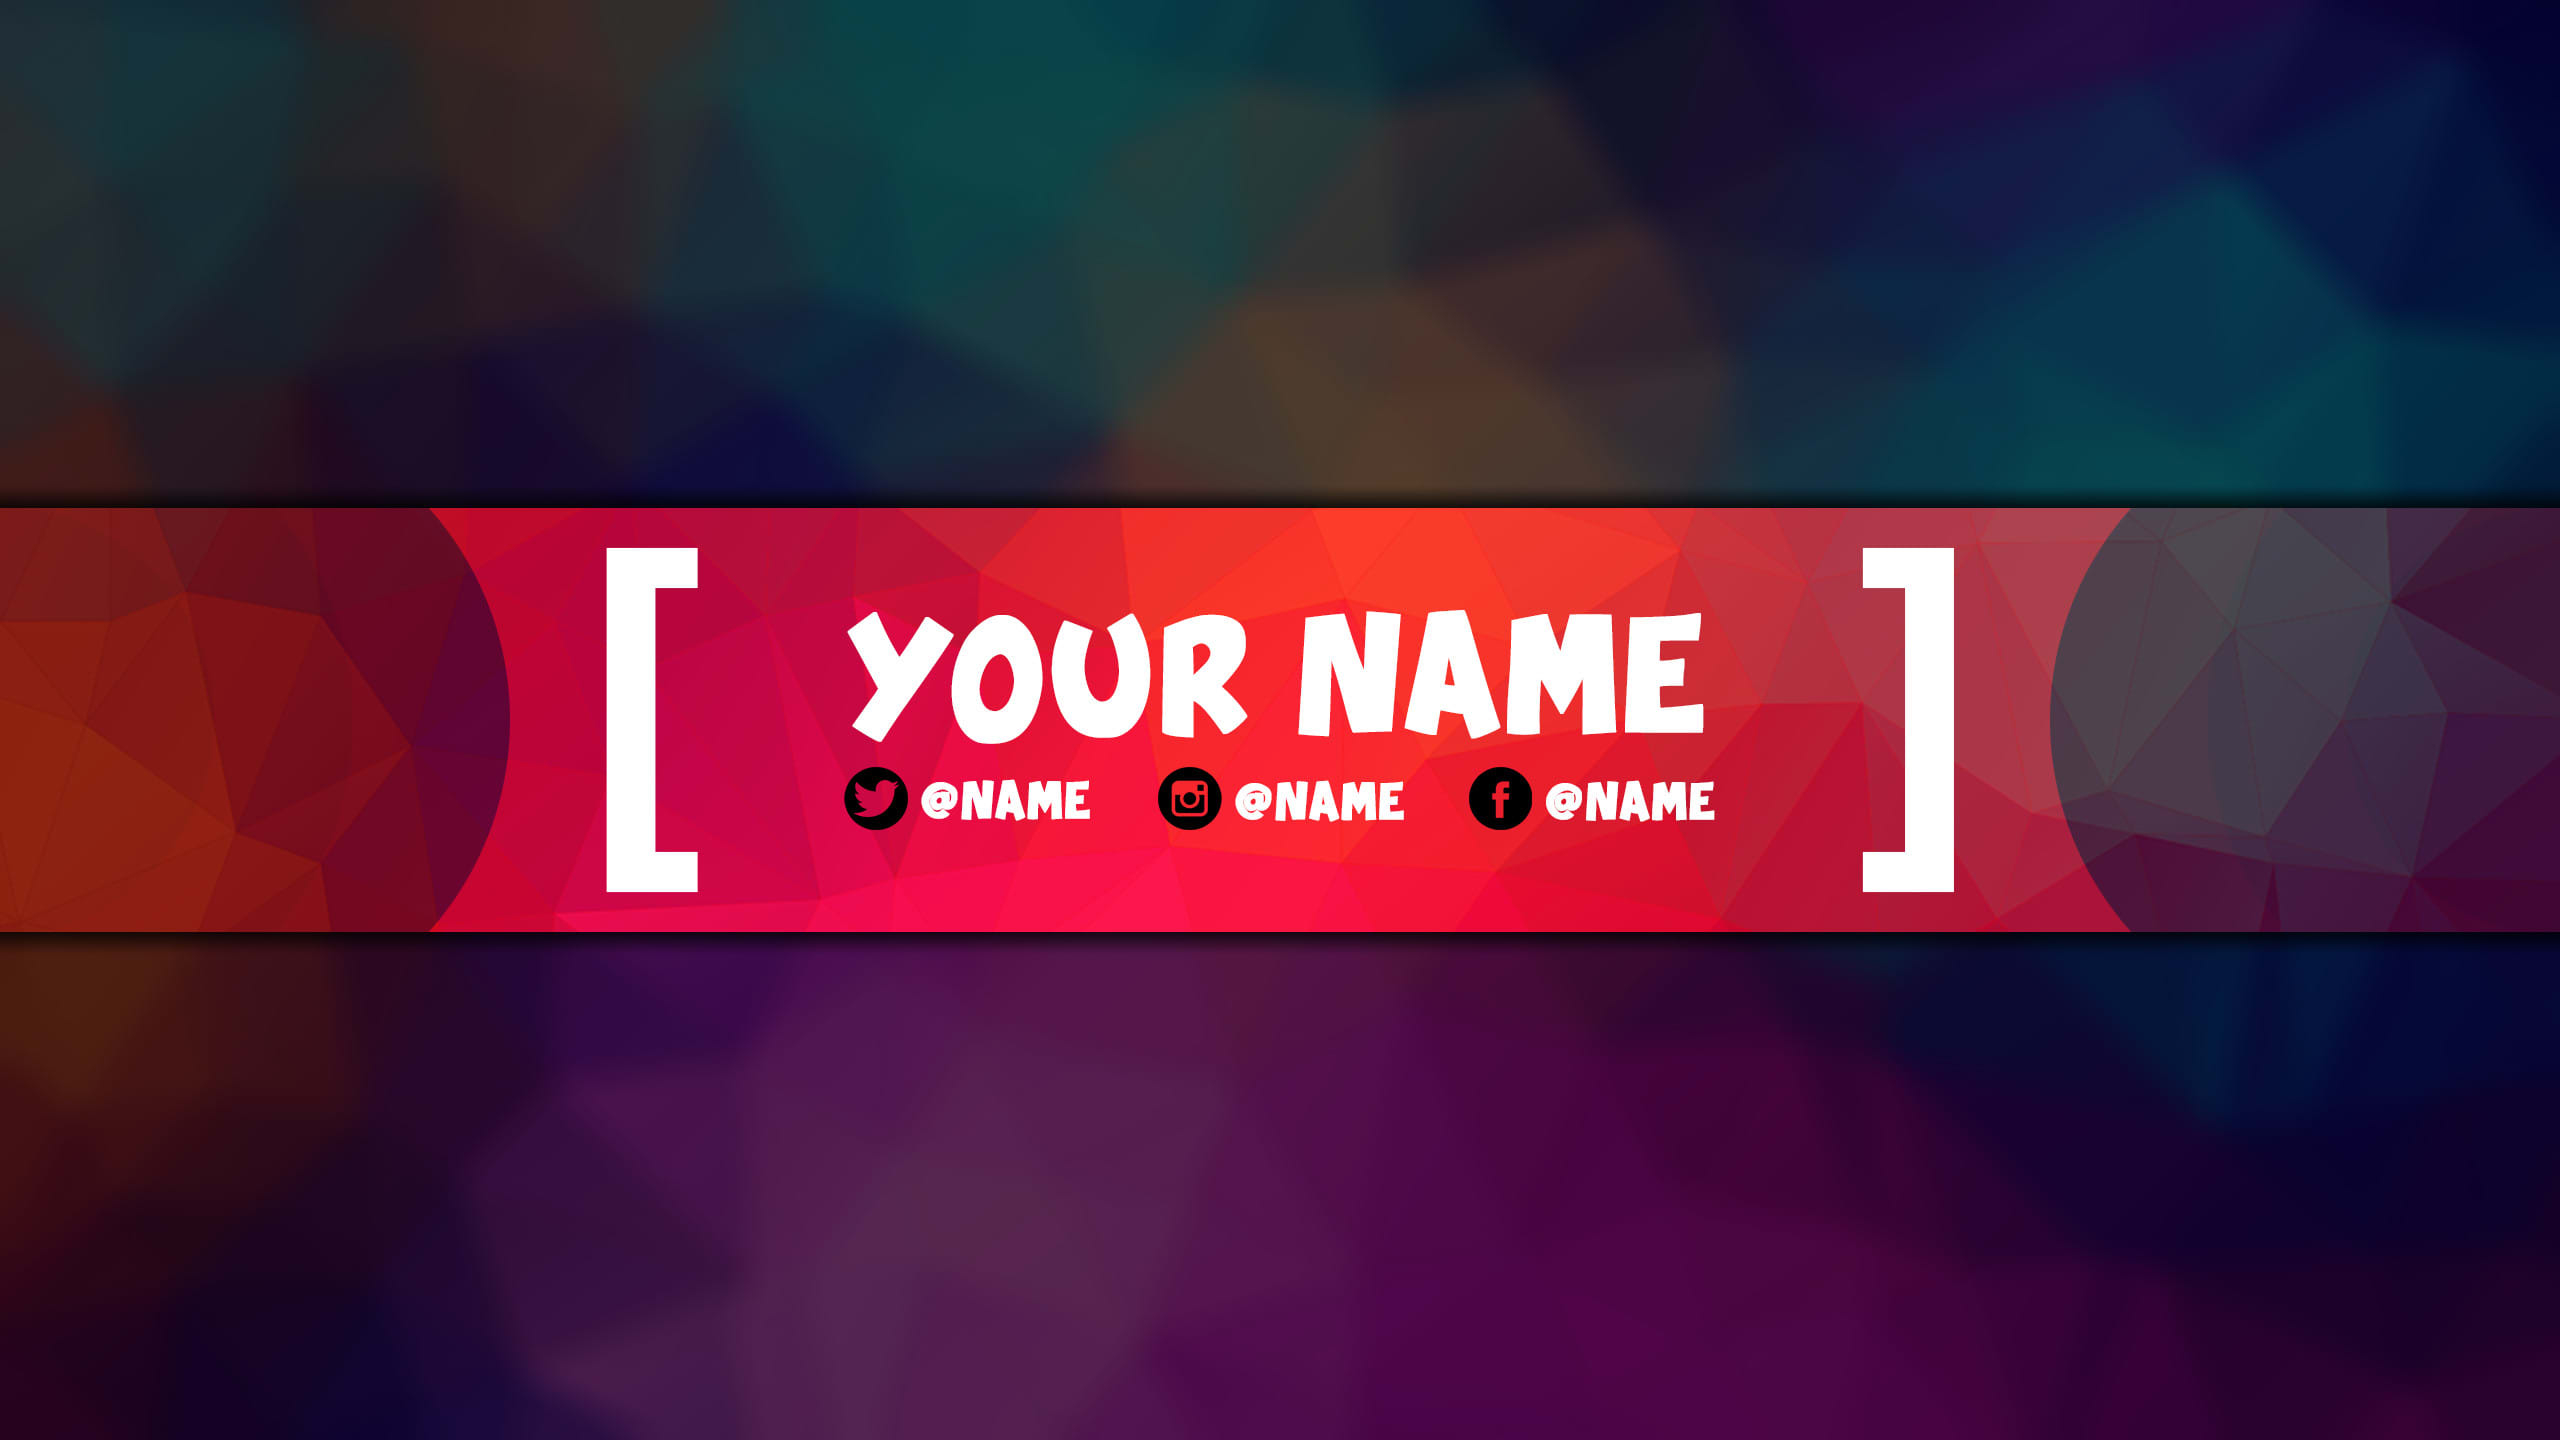 youtube banner size 2021